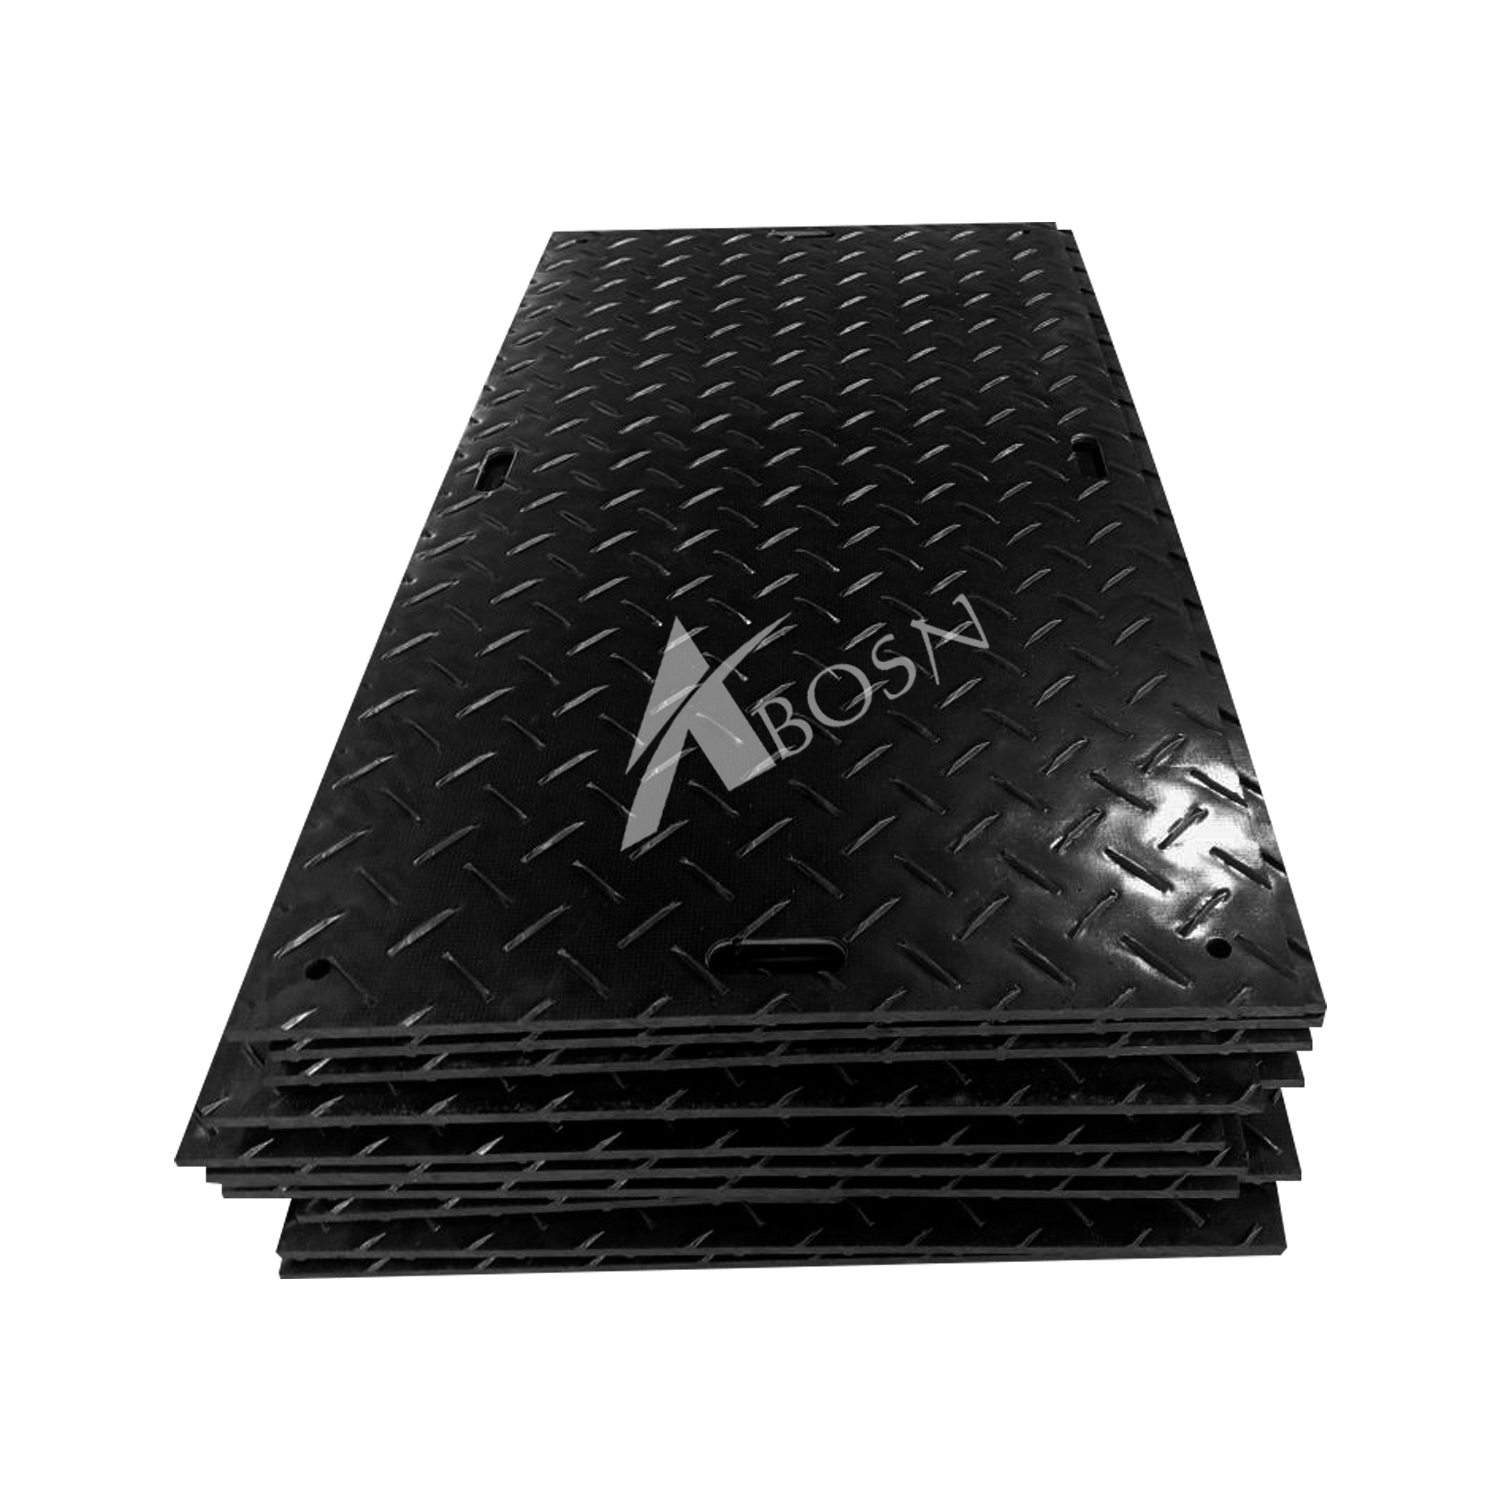 HDPE plastic temporary ground protection access trackway mats road plates